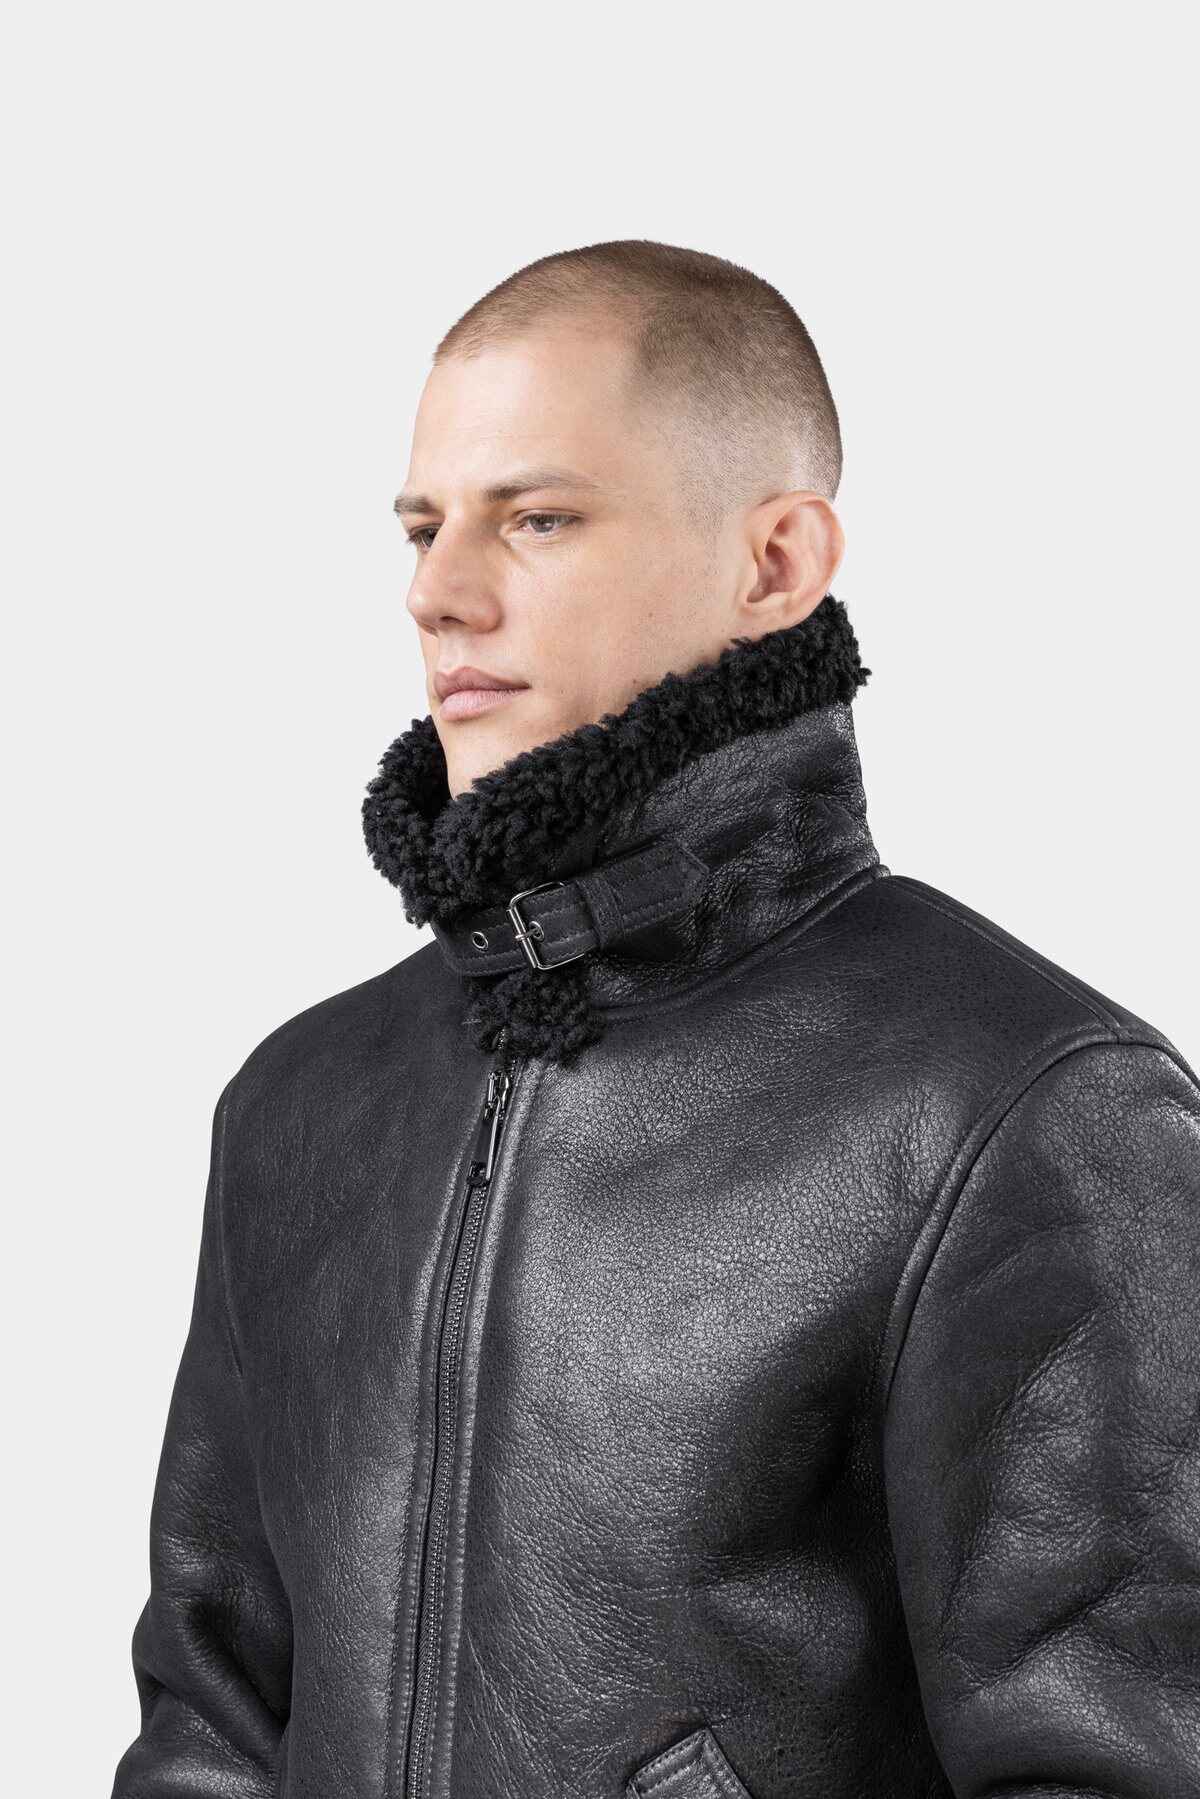 Model wearing Mens Black Shearling Leather Jacket presenting the collar